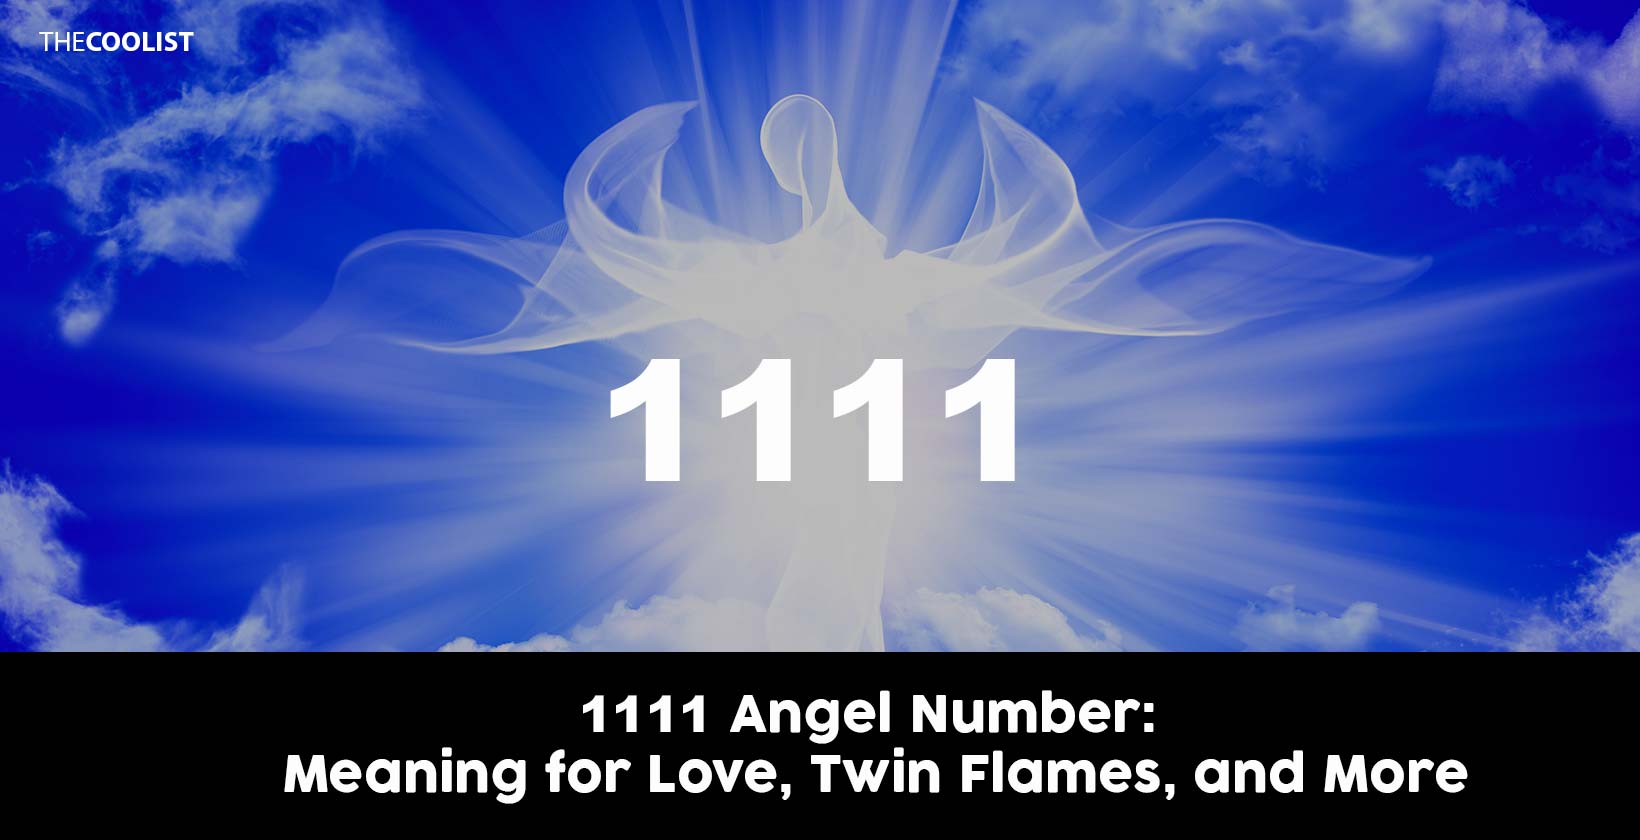 1111 Angel Number: Meaning for Love, Twin Flames, and More